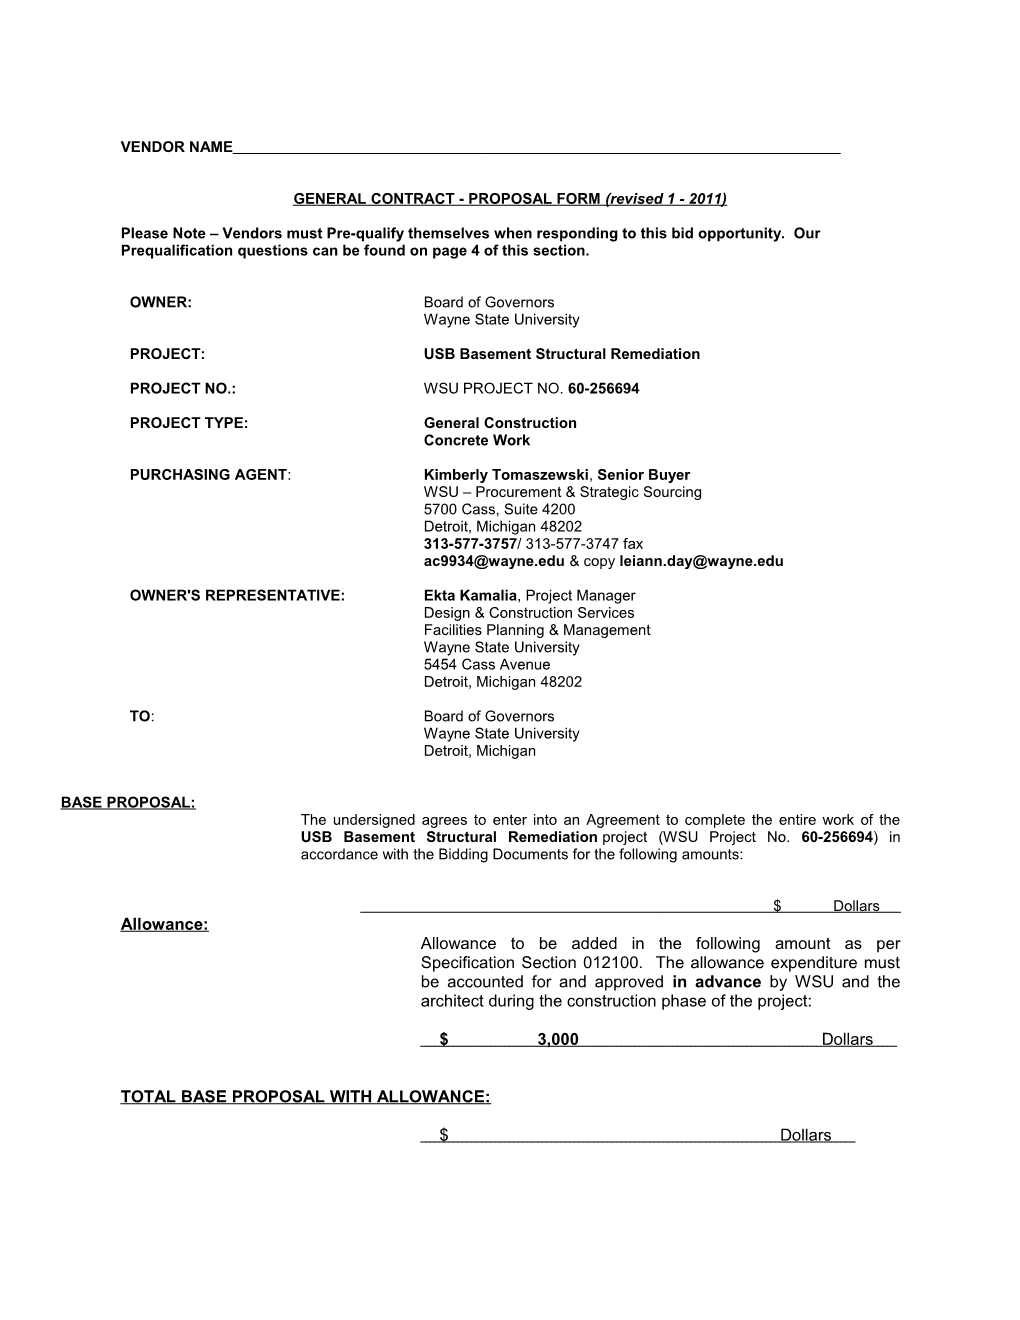 GENERAL CONTRACT - PROPOSAL FORM (Revised 1 - 2011)